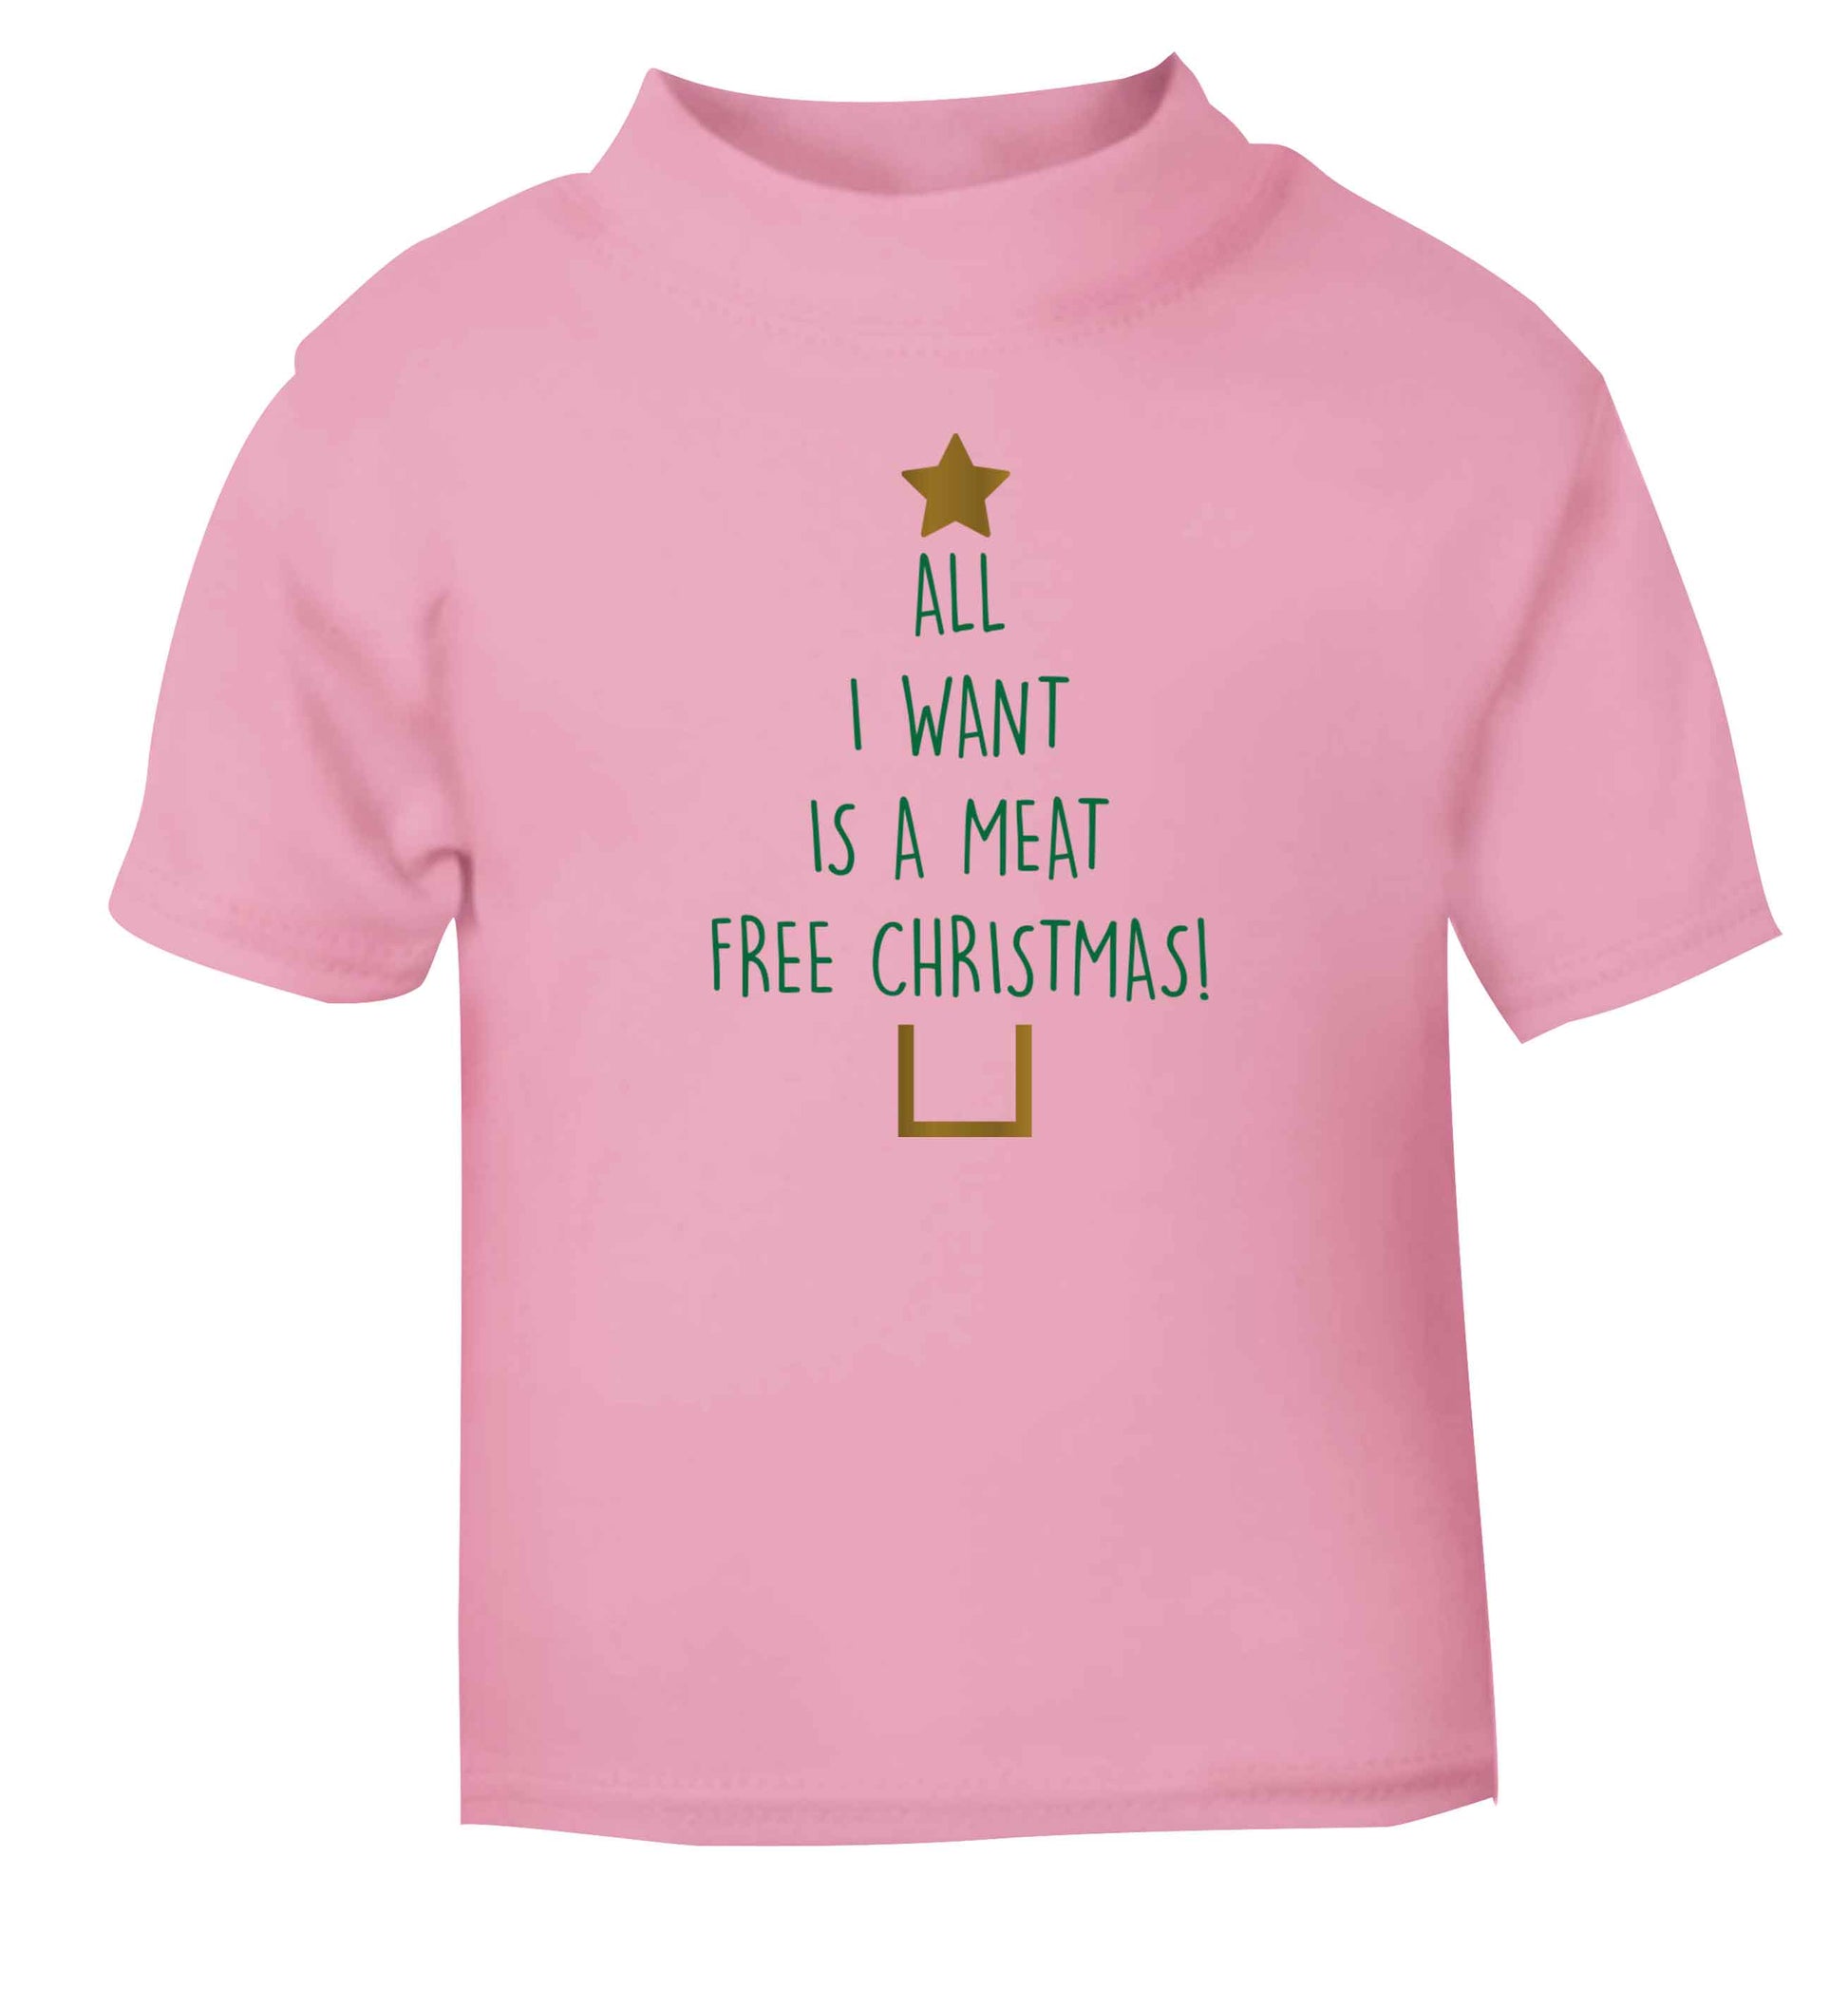 All I want is a meat free Christmas light pink Baby Toddler Tshirt 2 Years